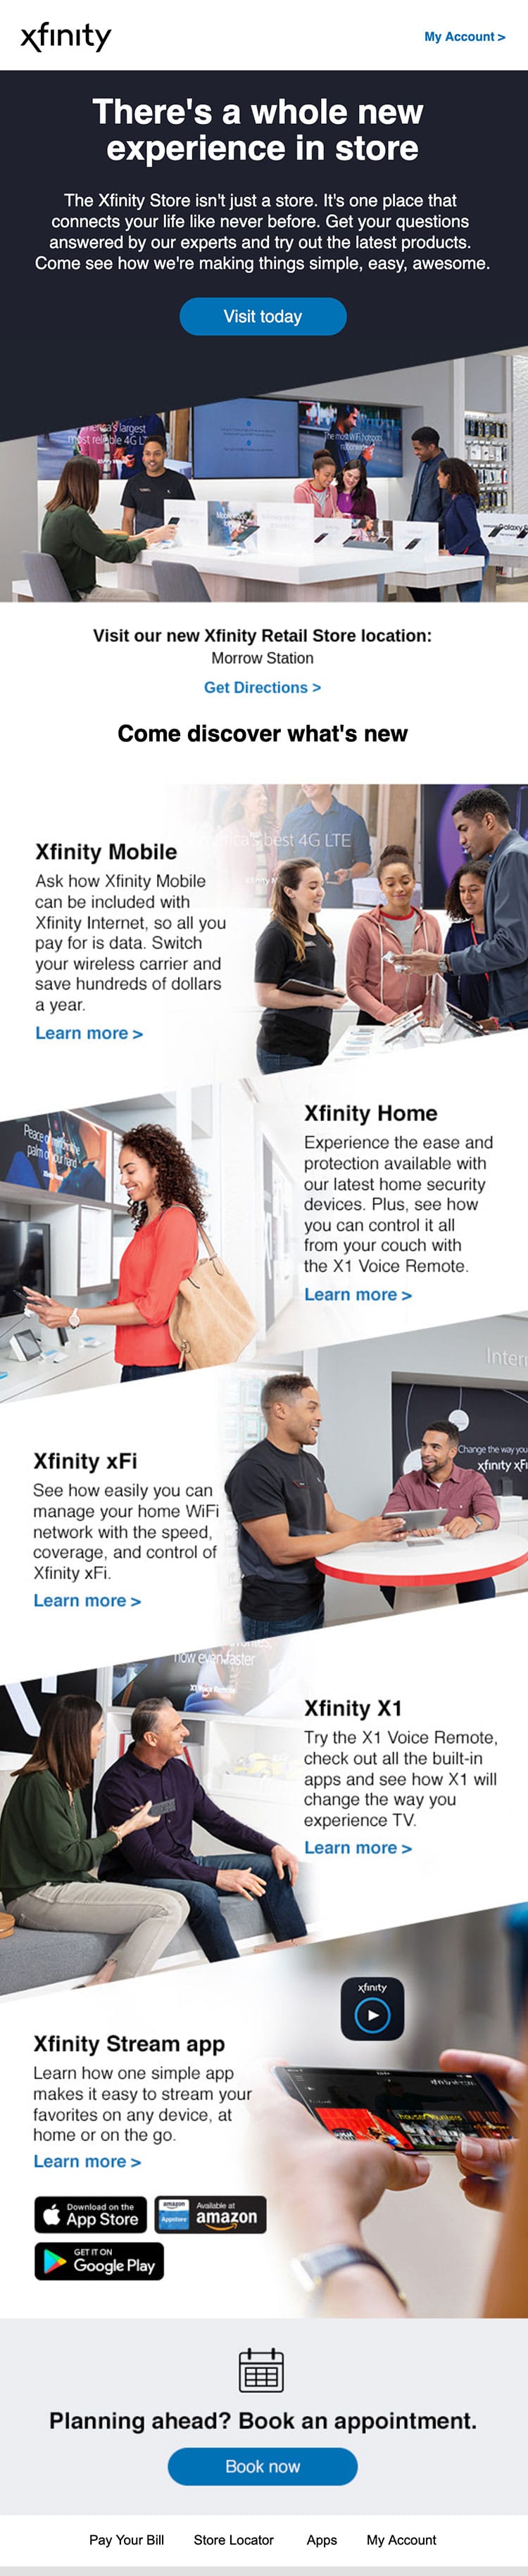 Take a look at this email example from Xfinity: